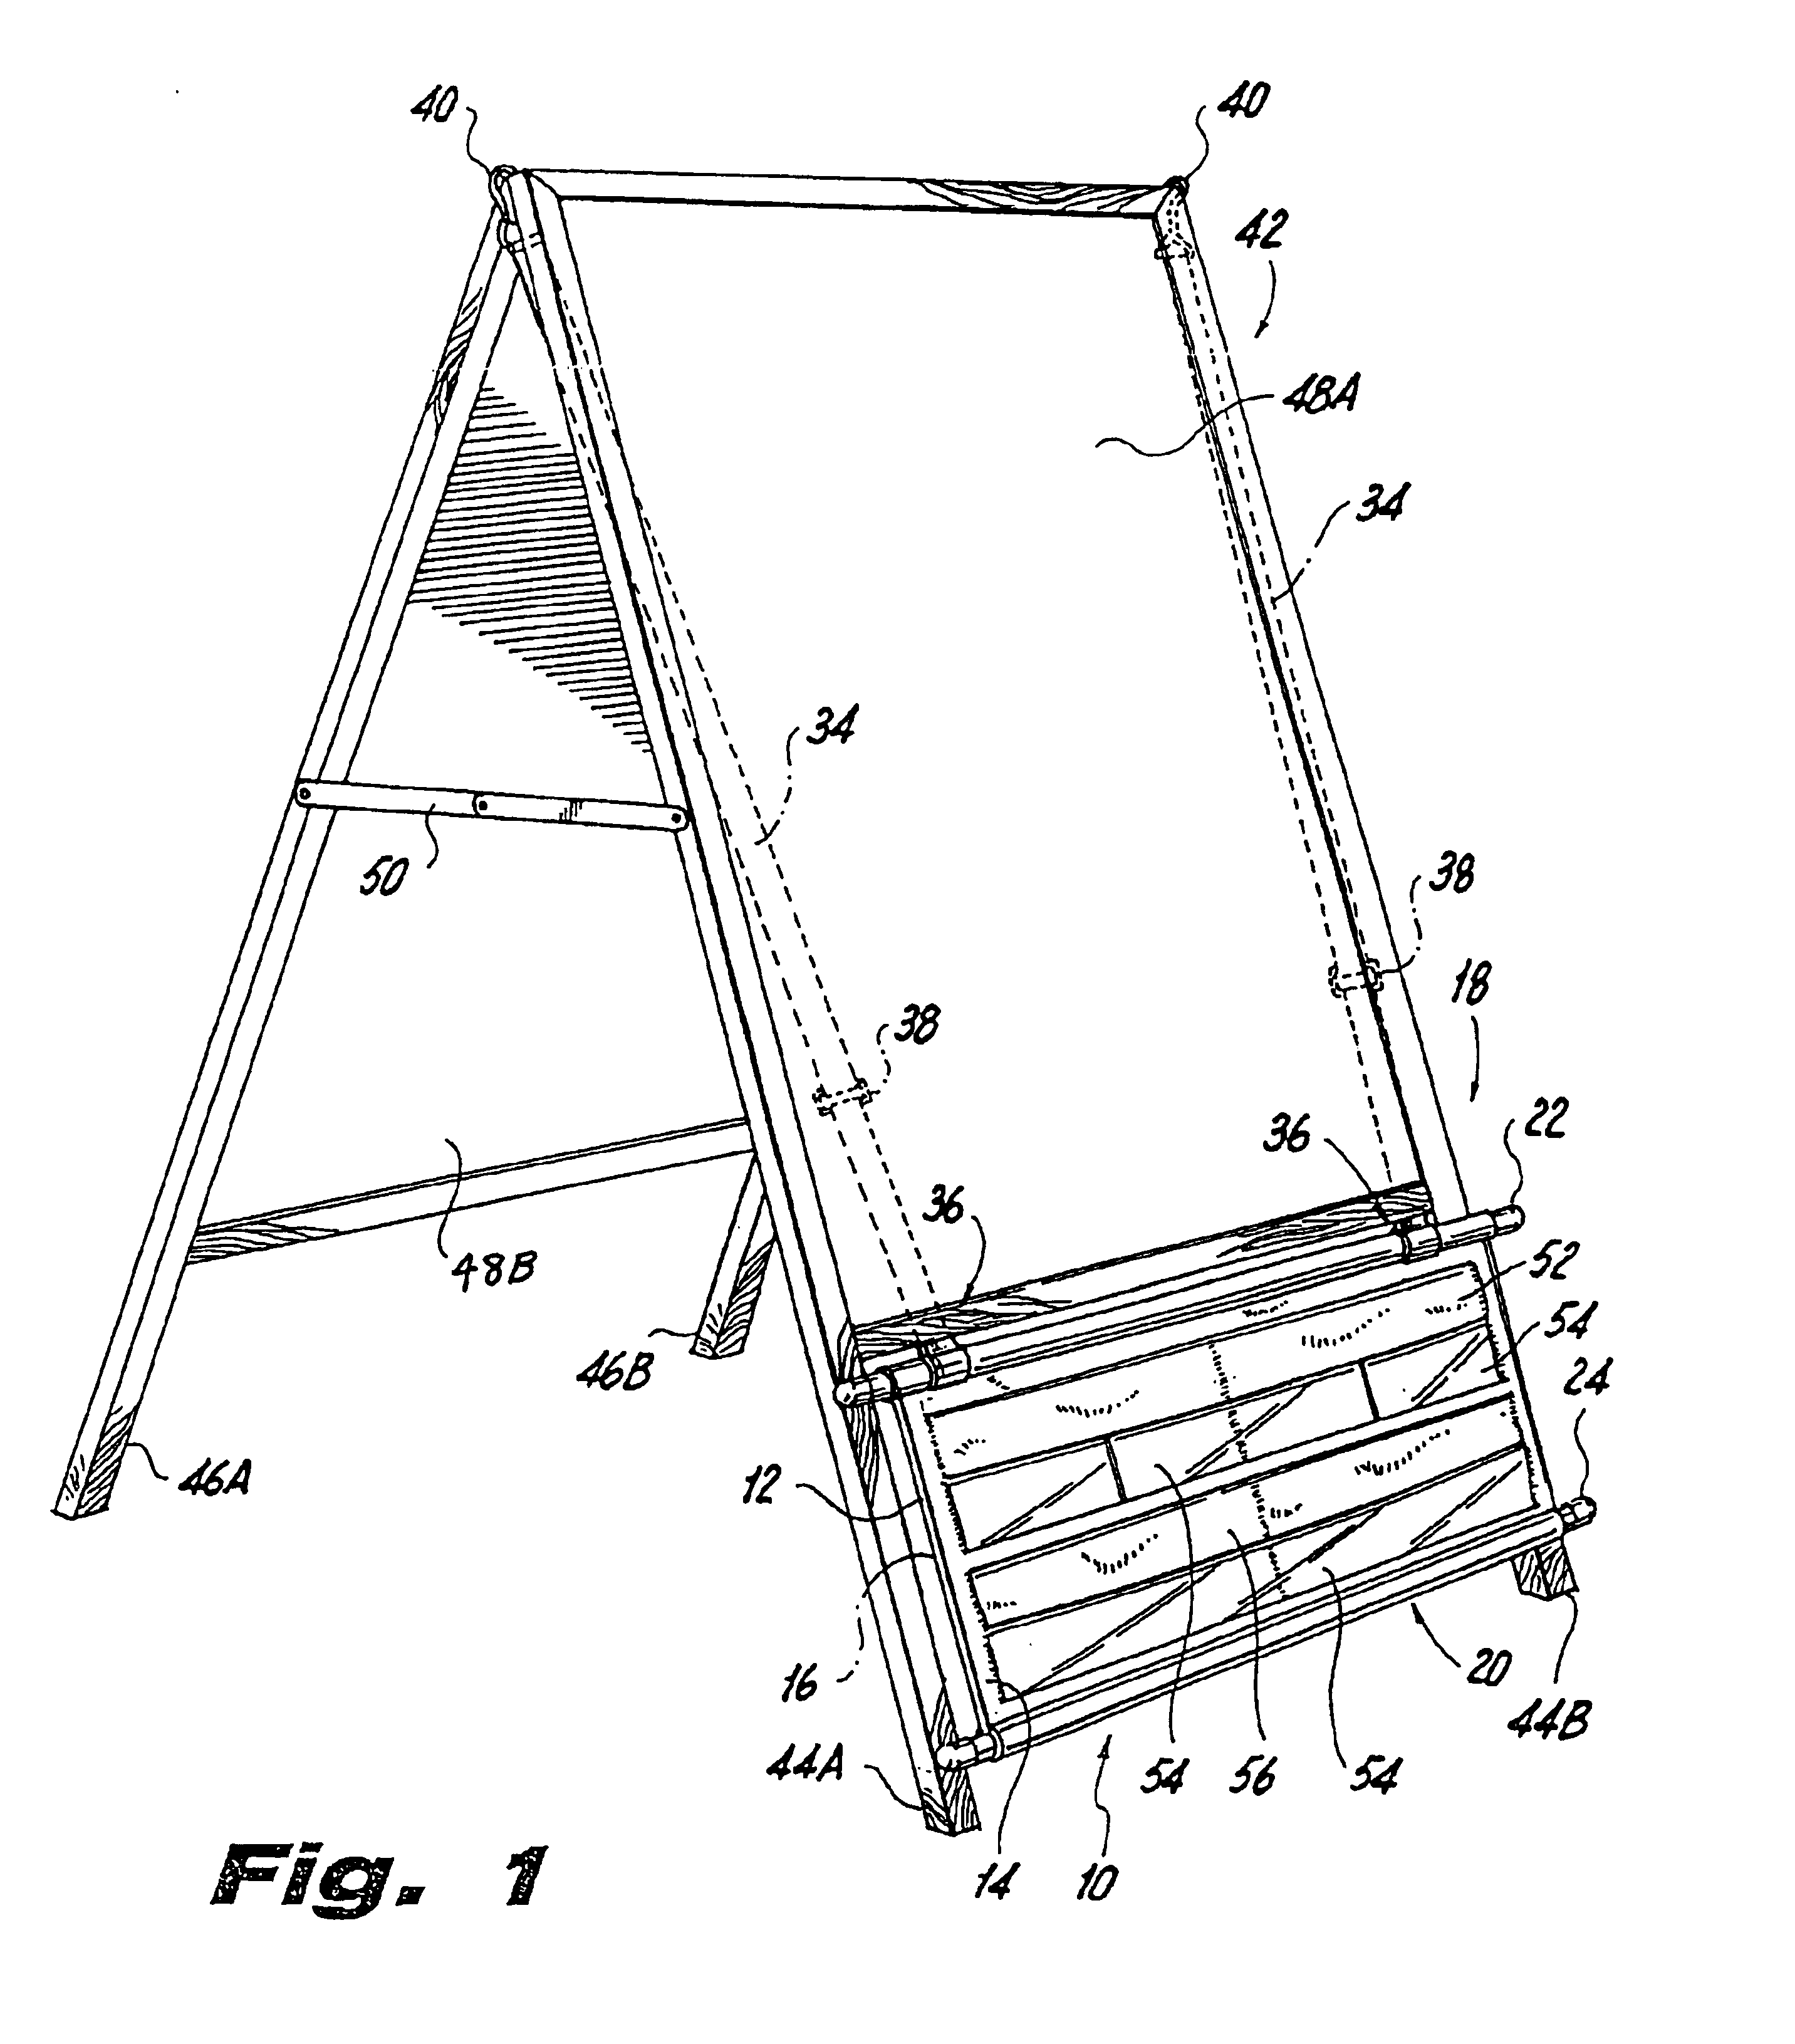 Apparatus for supporting articles on an easel